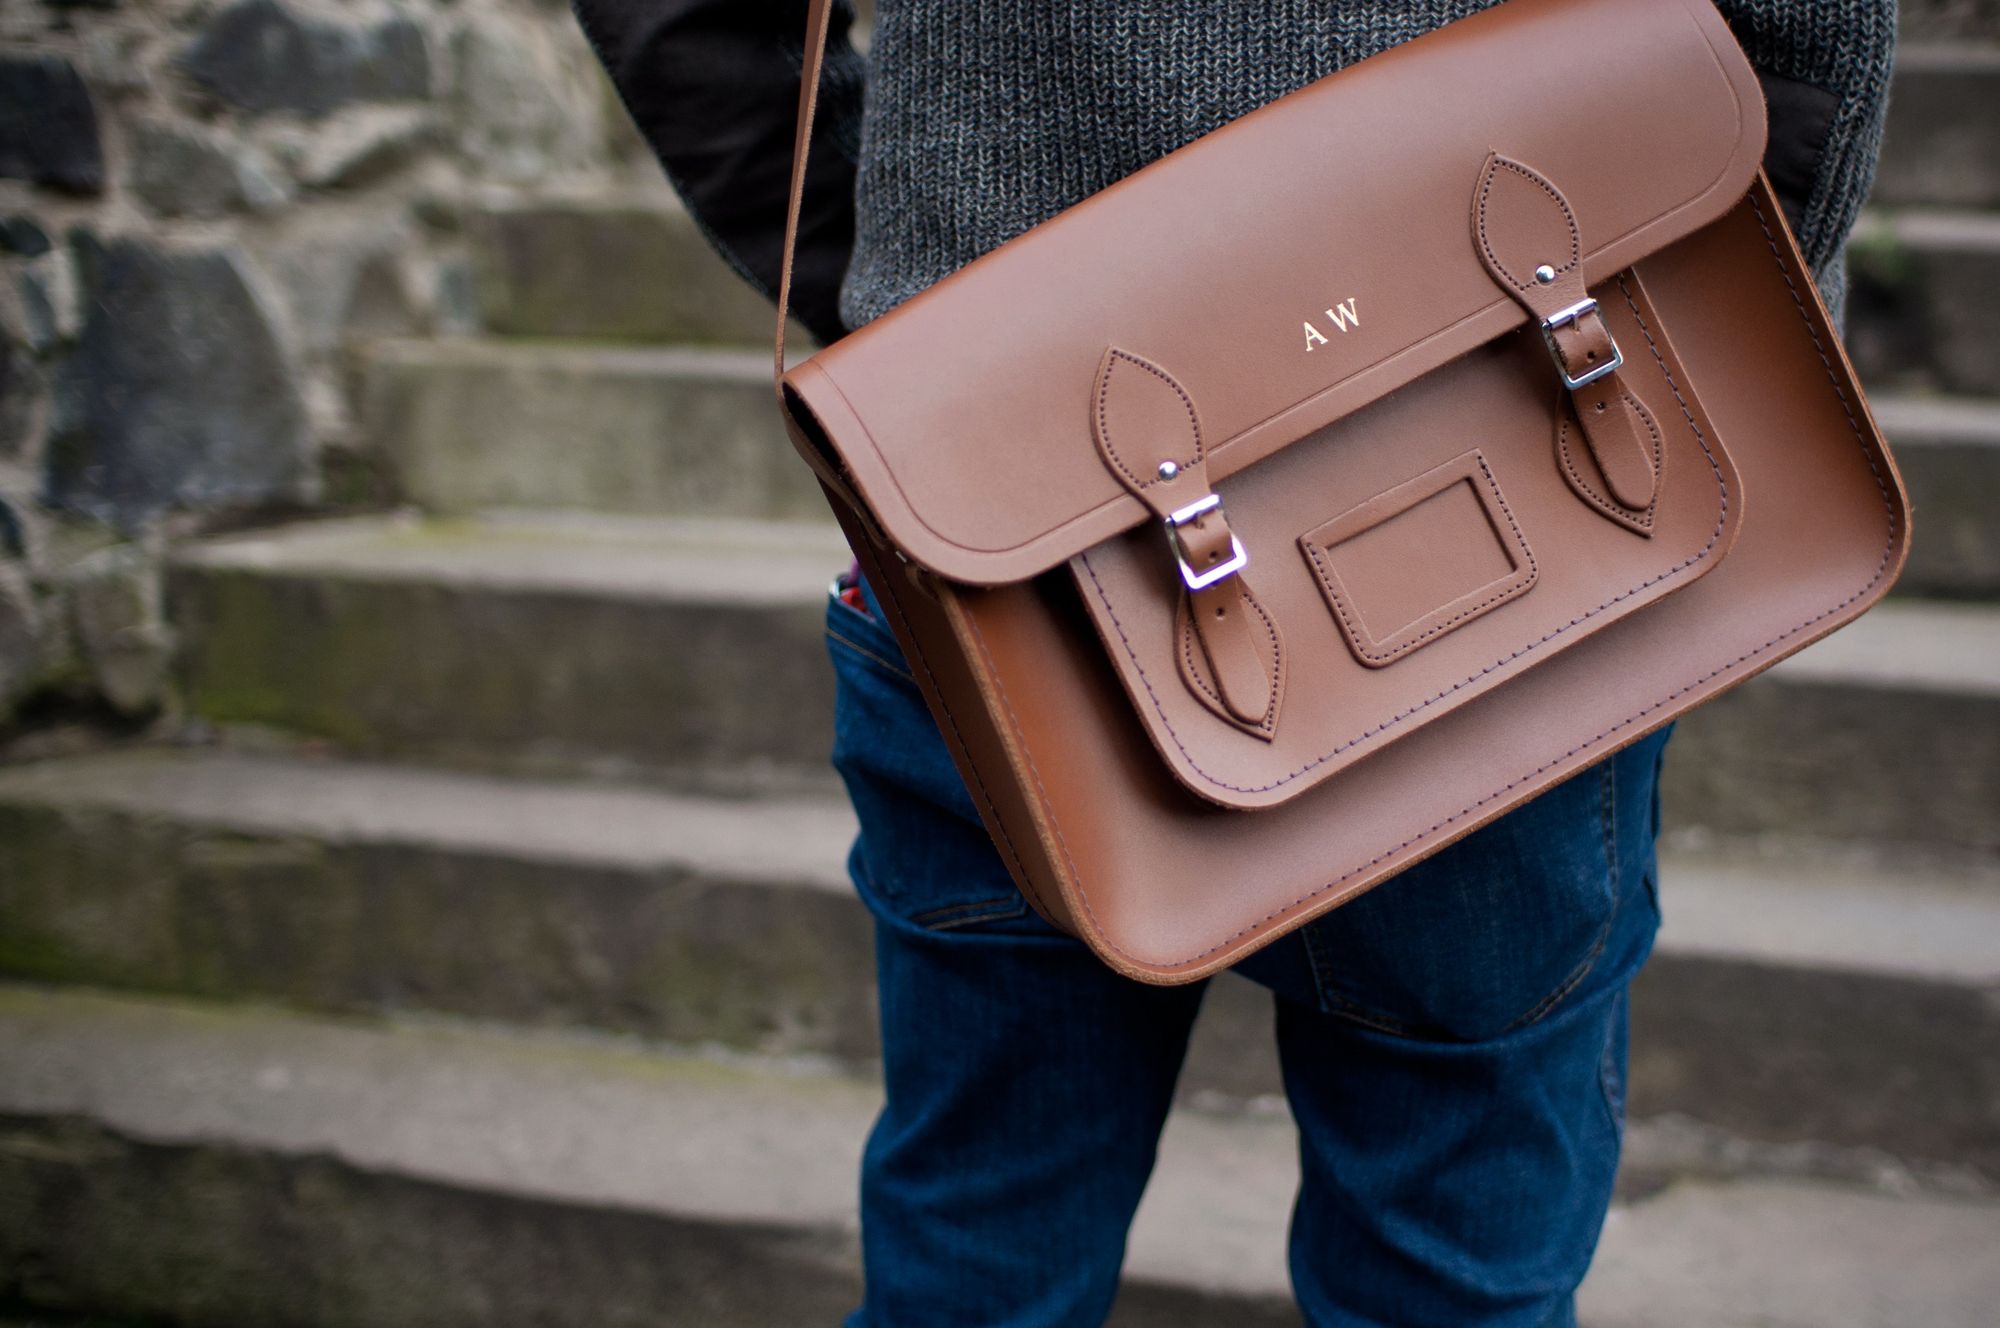 Leather Goods - Professional Insights for Selection, Care, and Use